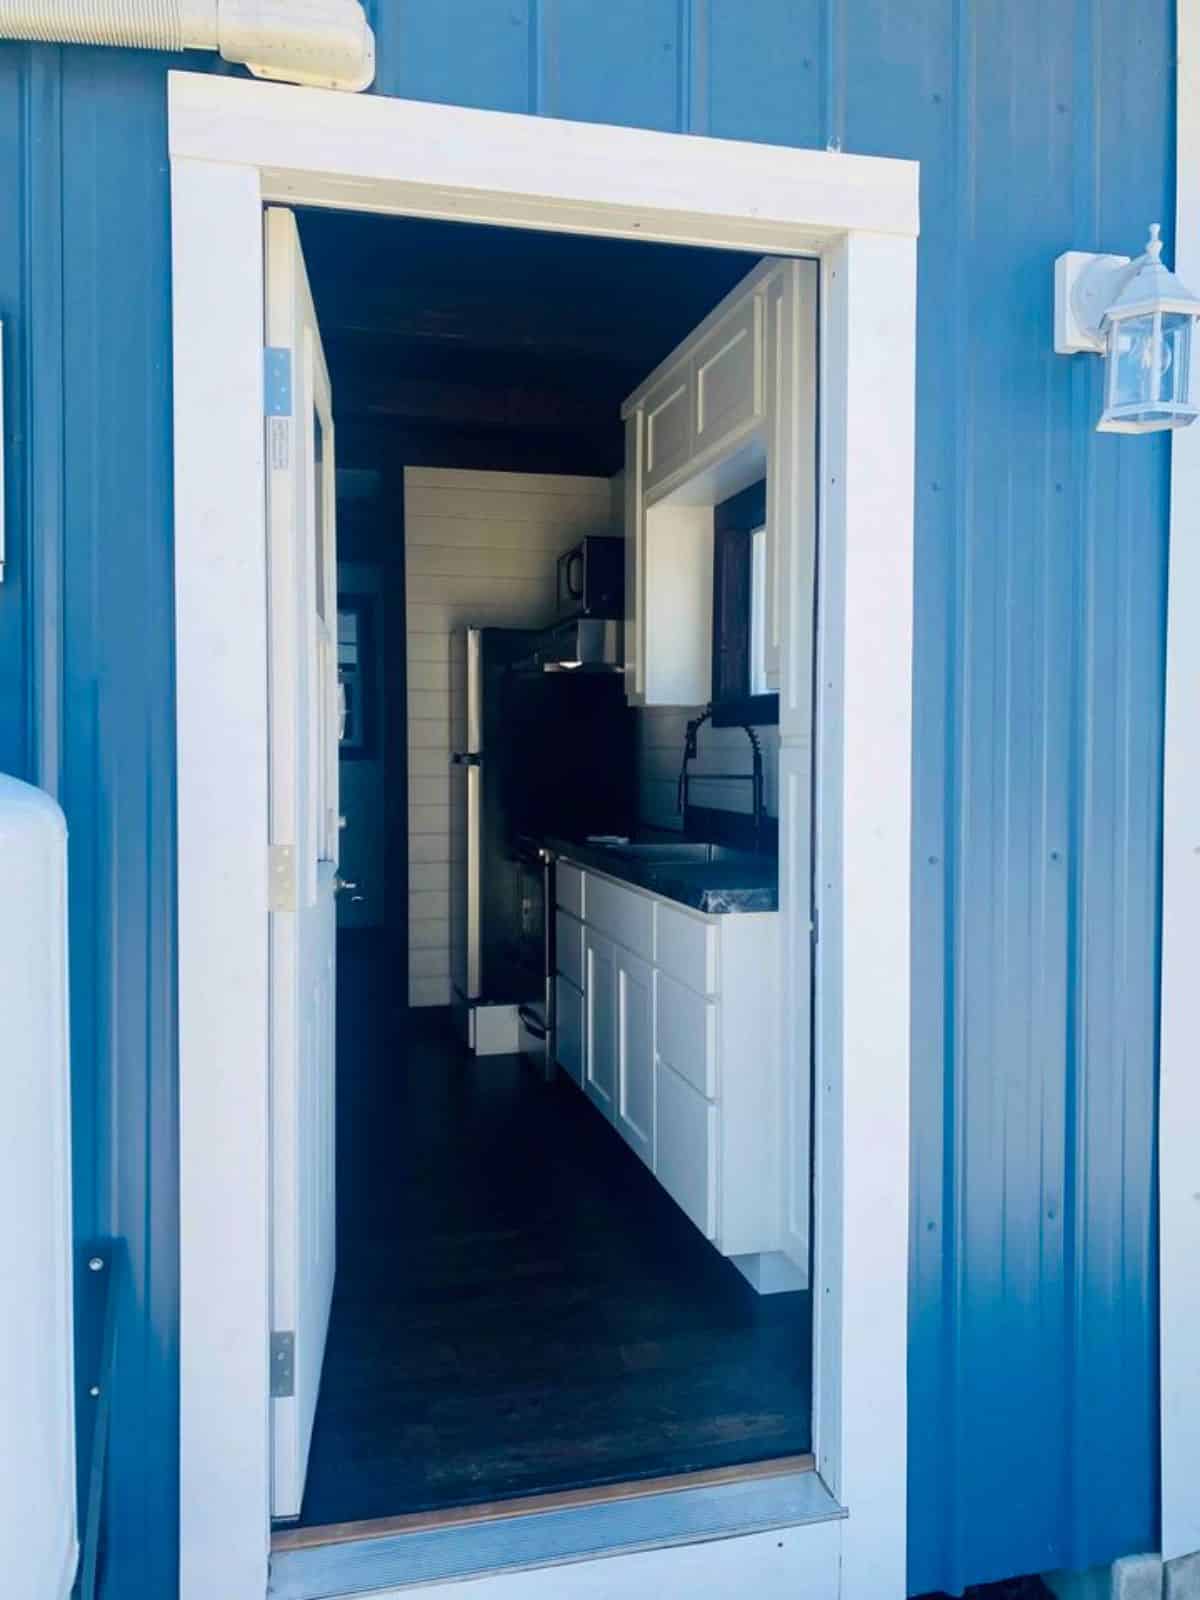 interiors view from main door of brand new tiny house